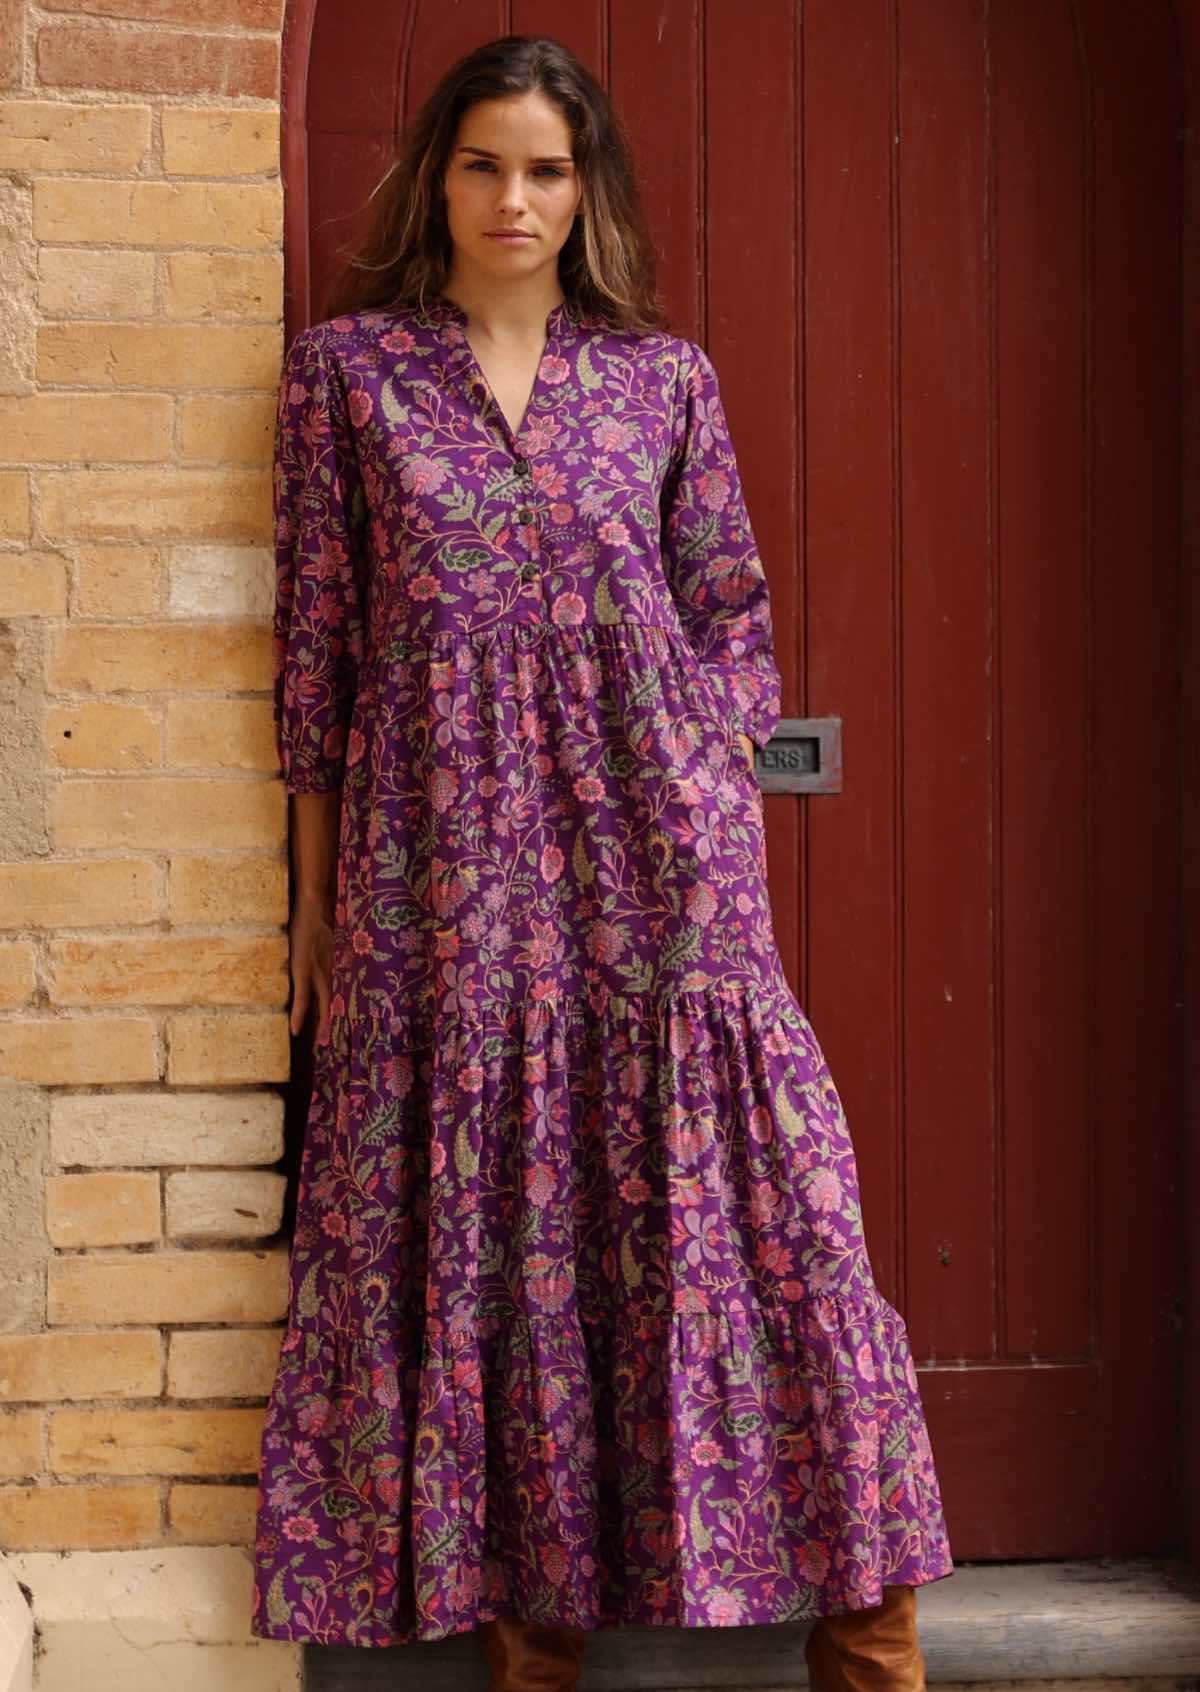 Cotton maxi dress with tiered skirt and buttoned bodice and pockets